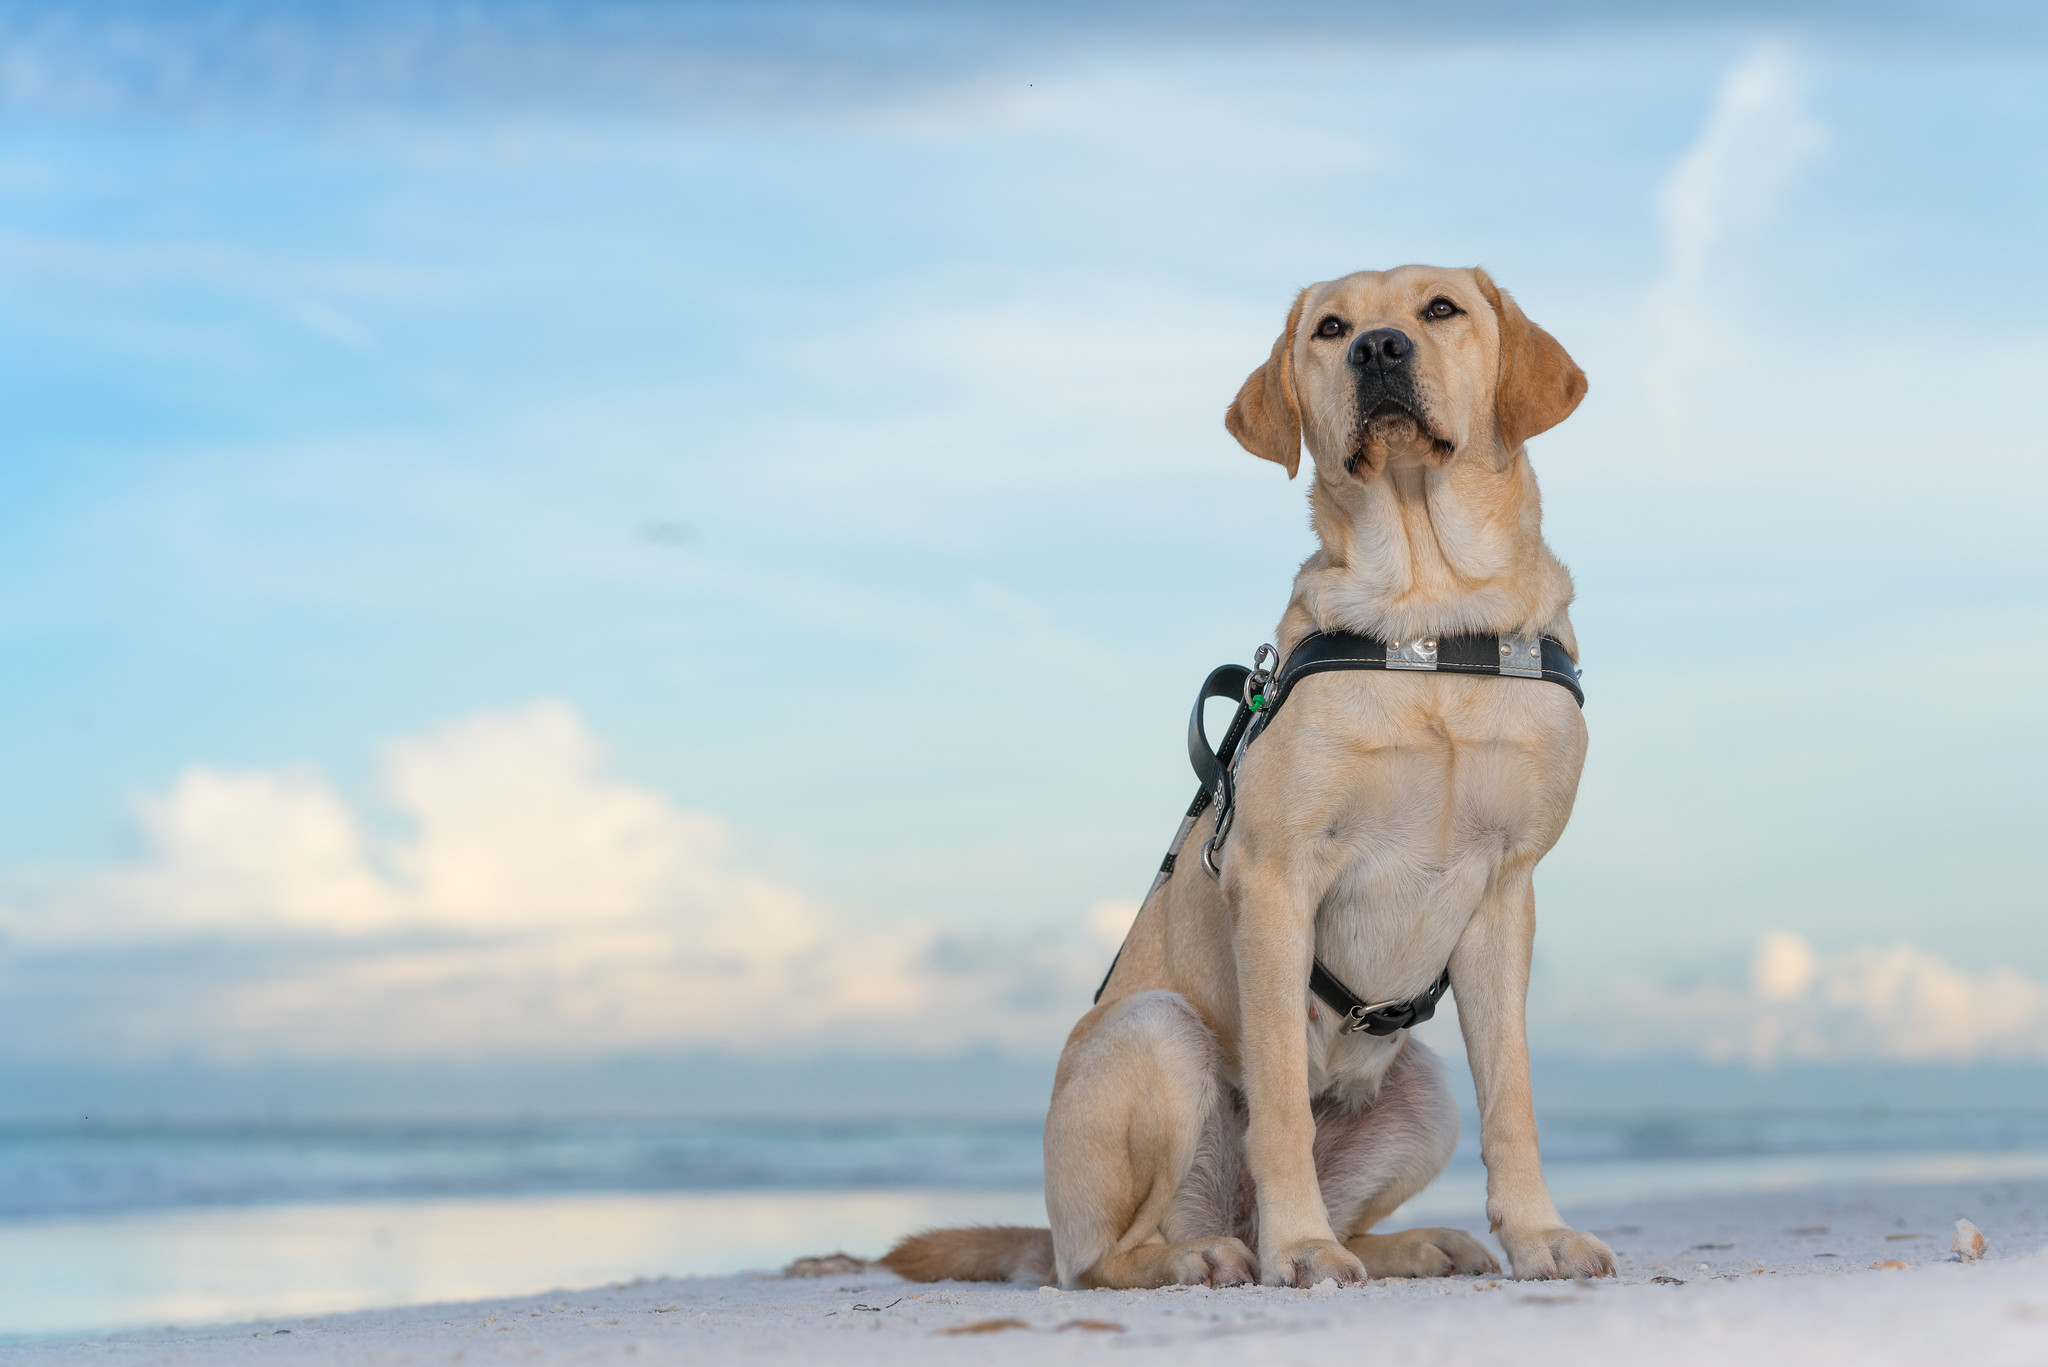 A yellow lab in a black guide dog harness sits in the sand at the beach, the ocean visible in the distance in the summer heat.